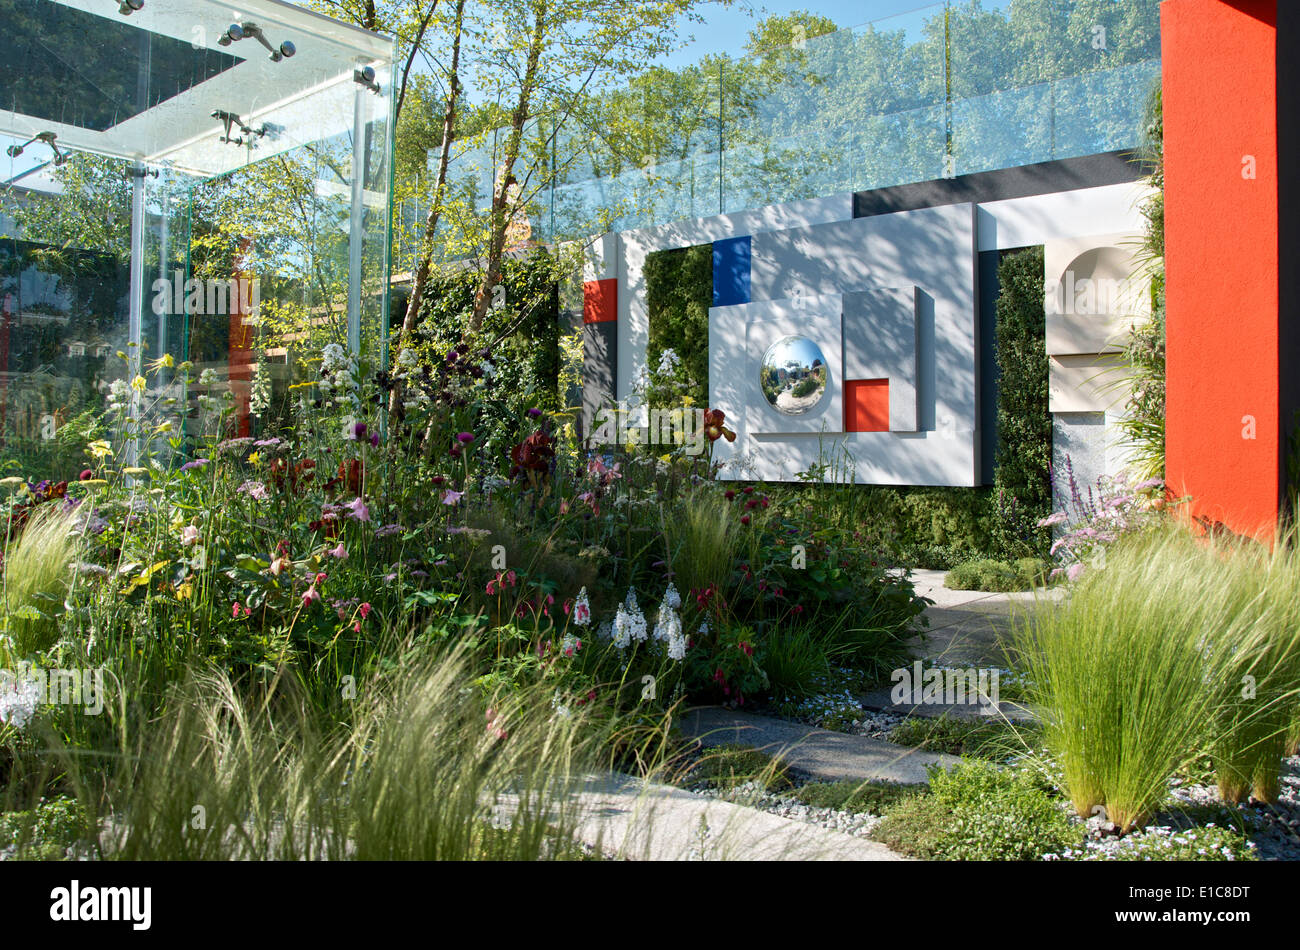 Gold Medal winning garden 'The Minds Eye' at RHS Chelsea Flower Show. Stock Photo